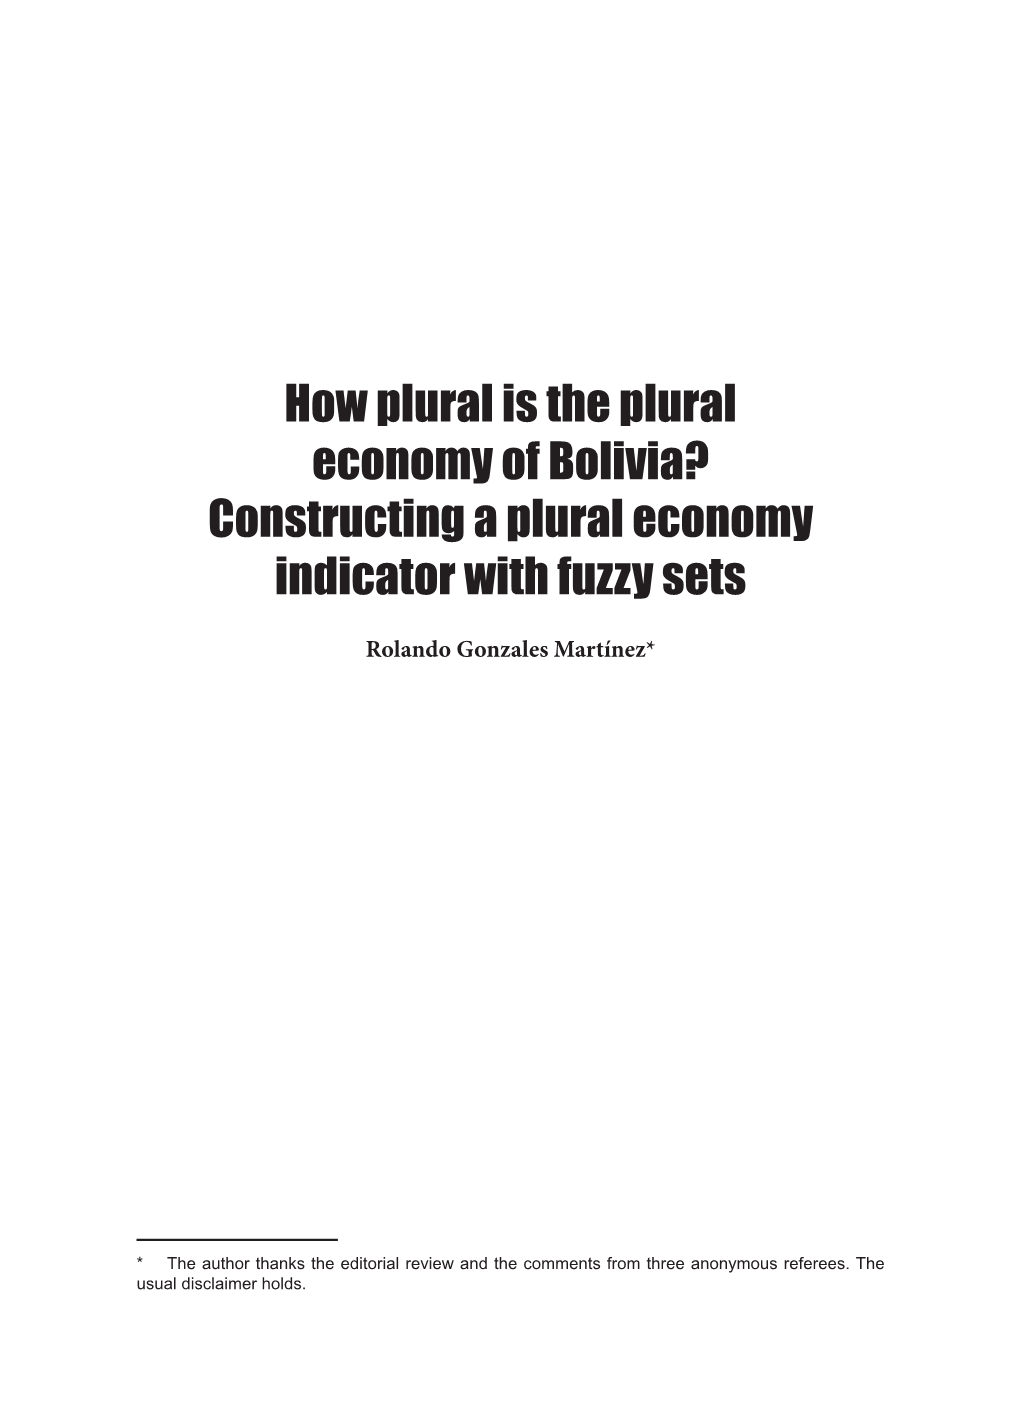 How Plural Is the Plural Economy of Bolivia? Constructing a Plural Economy Indicator with Fuzzy Sets